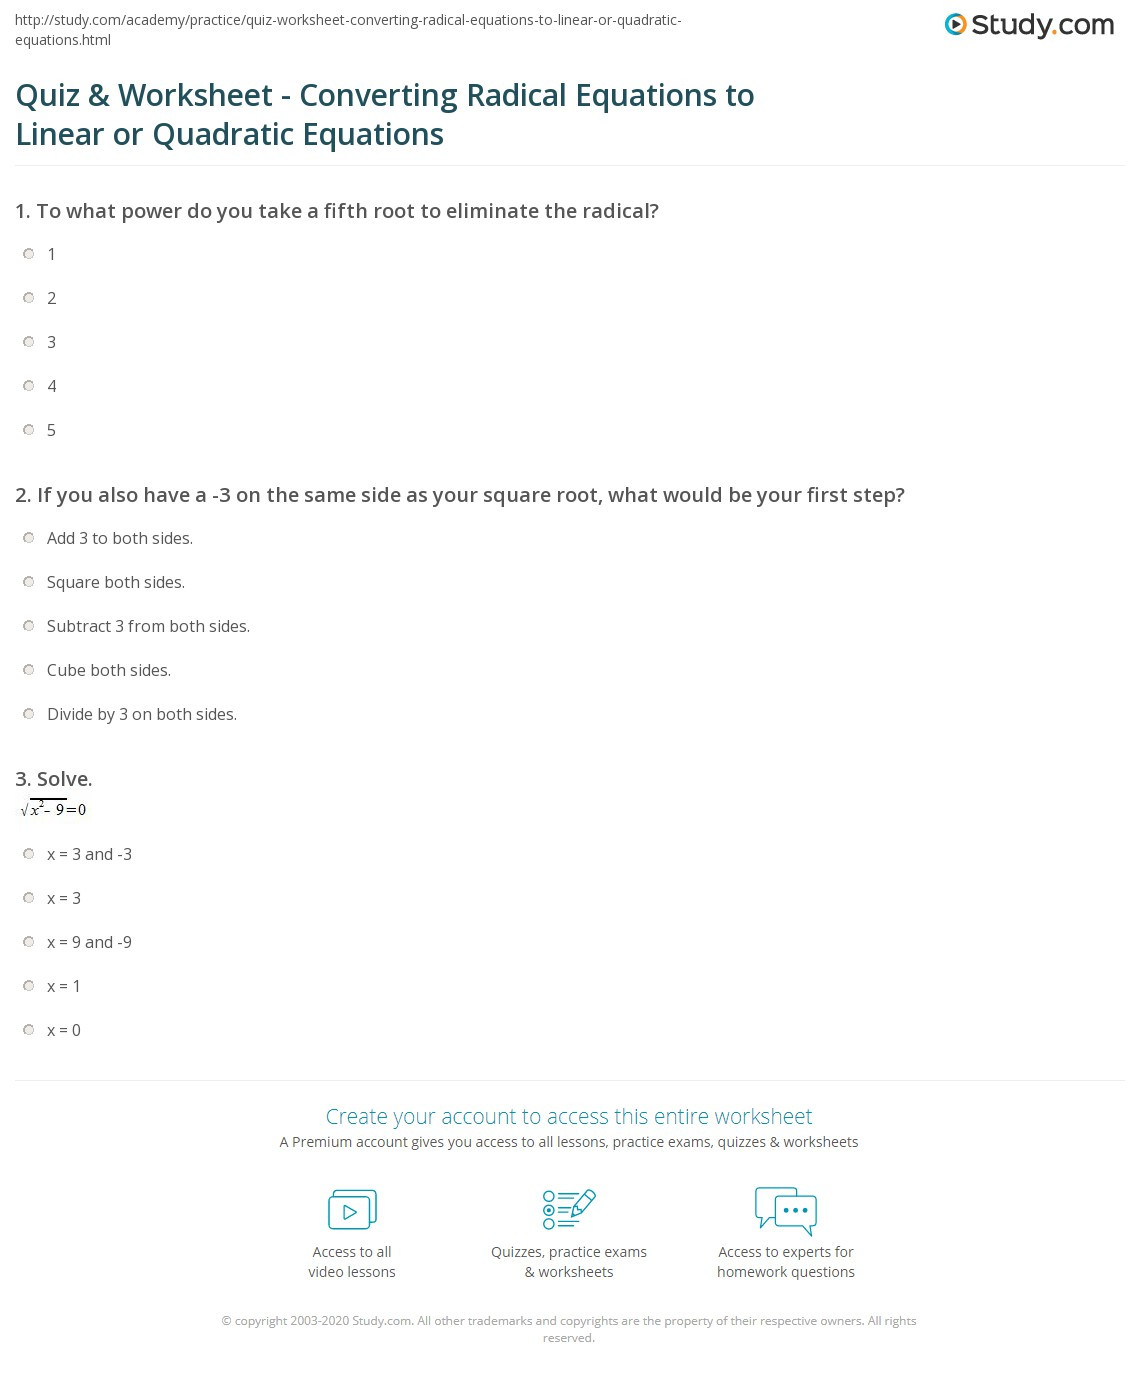 Solving Square Root Equations Worksheet Quiz &amp; Worksheet Converting Radical Equations to Linear or